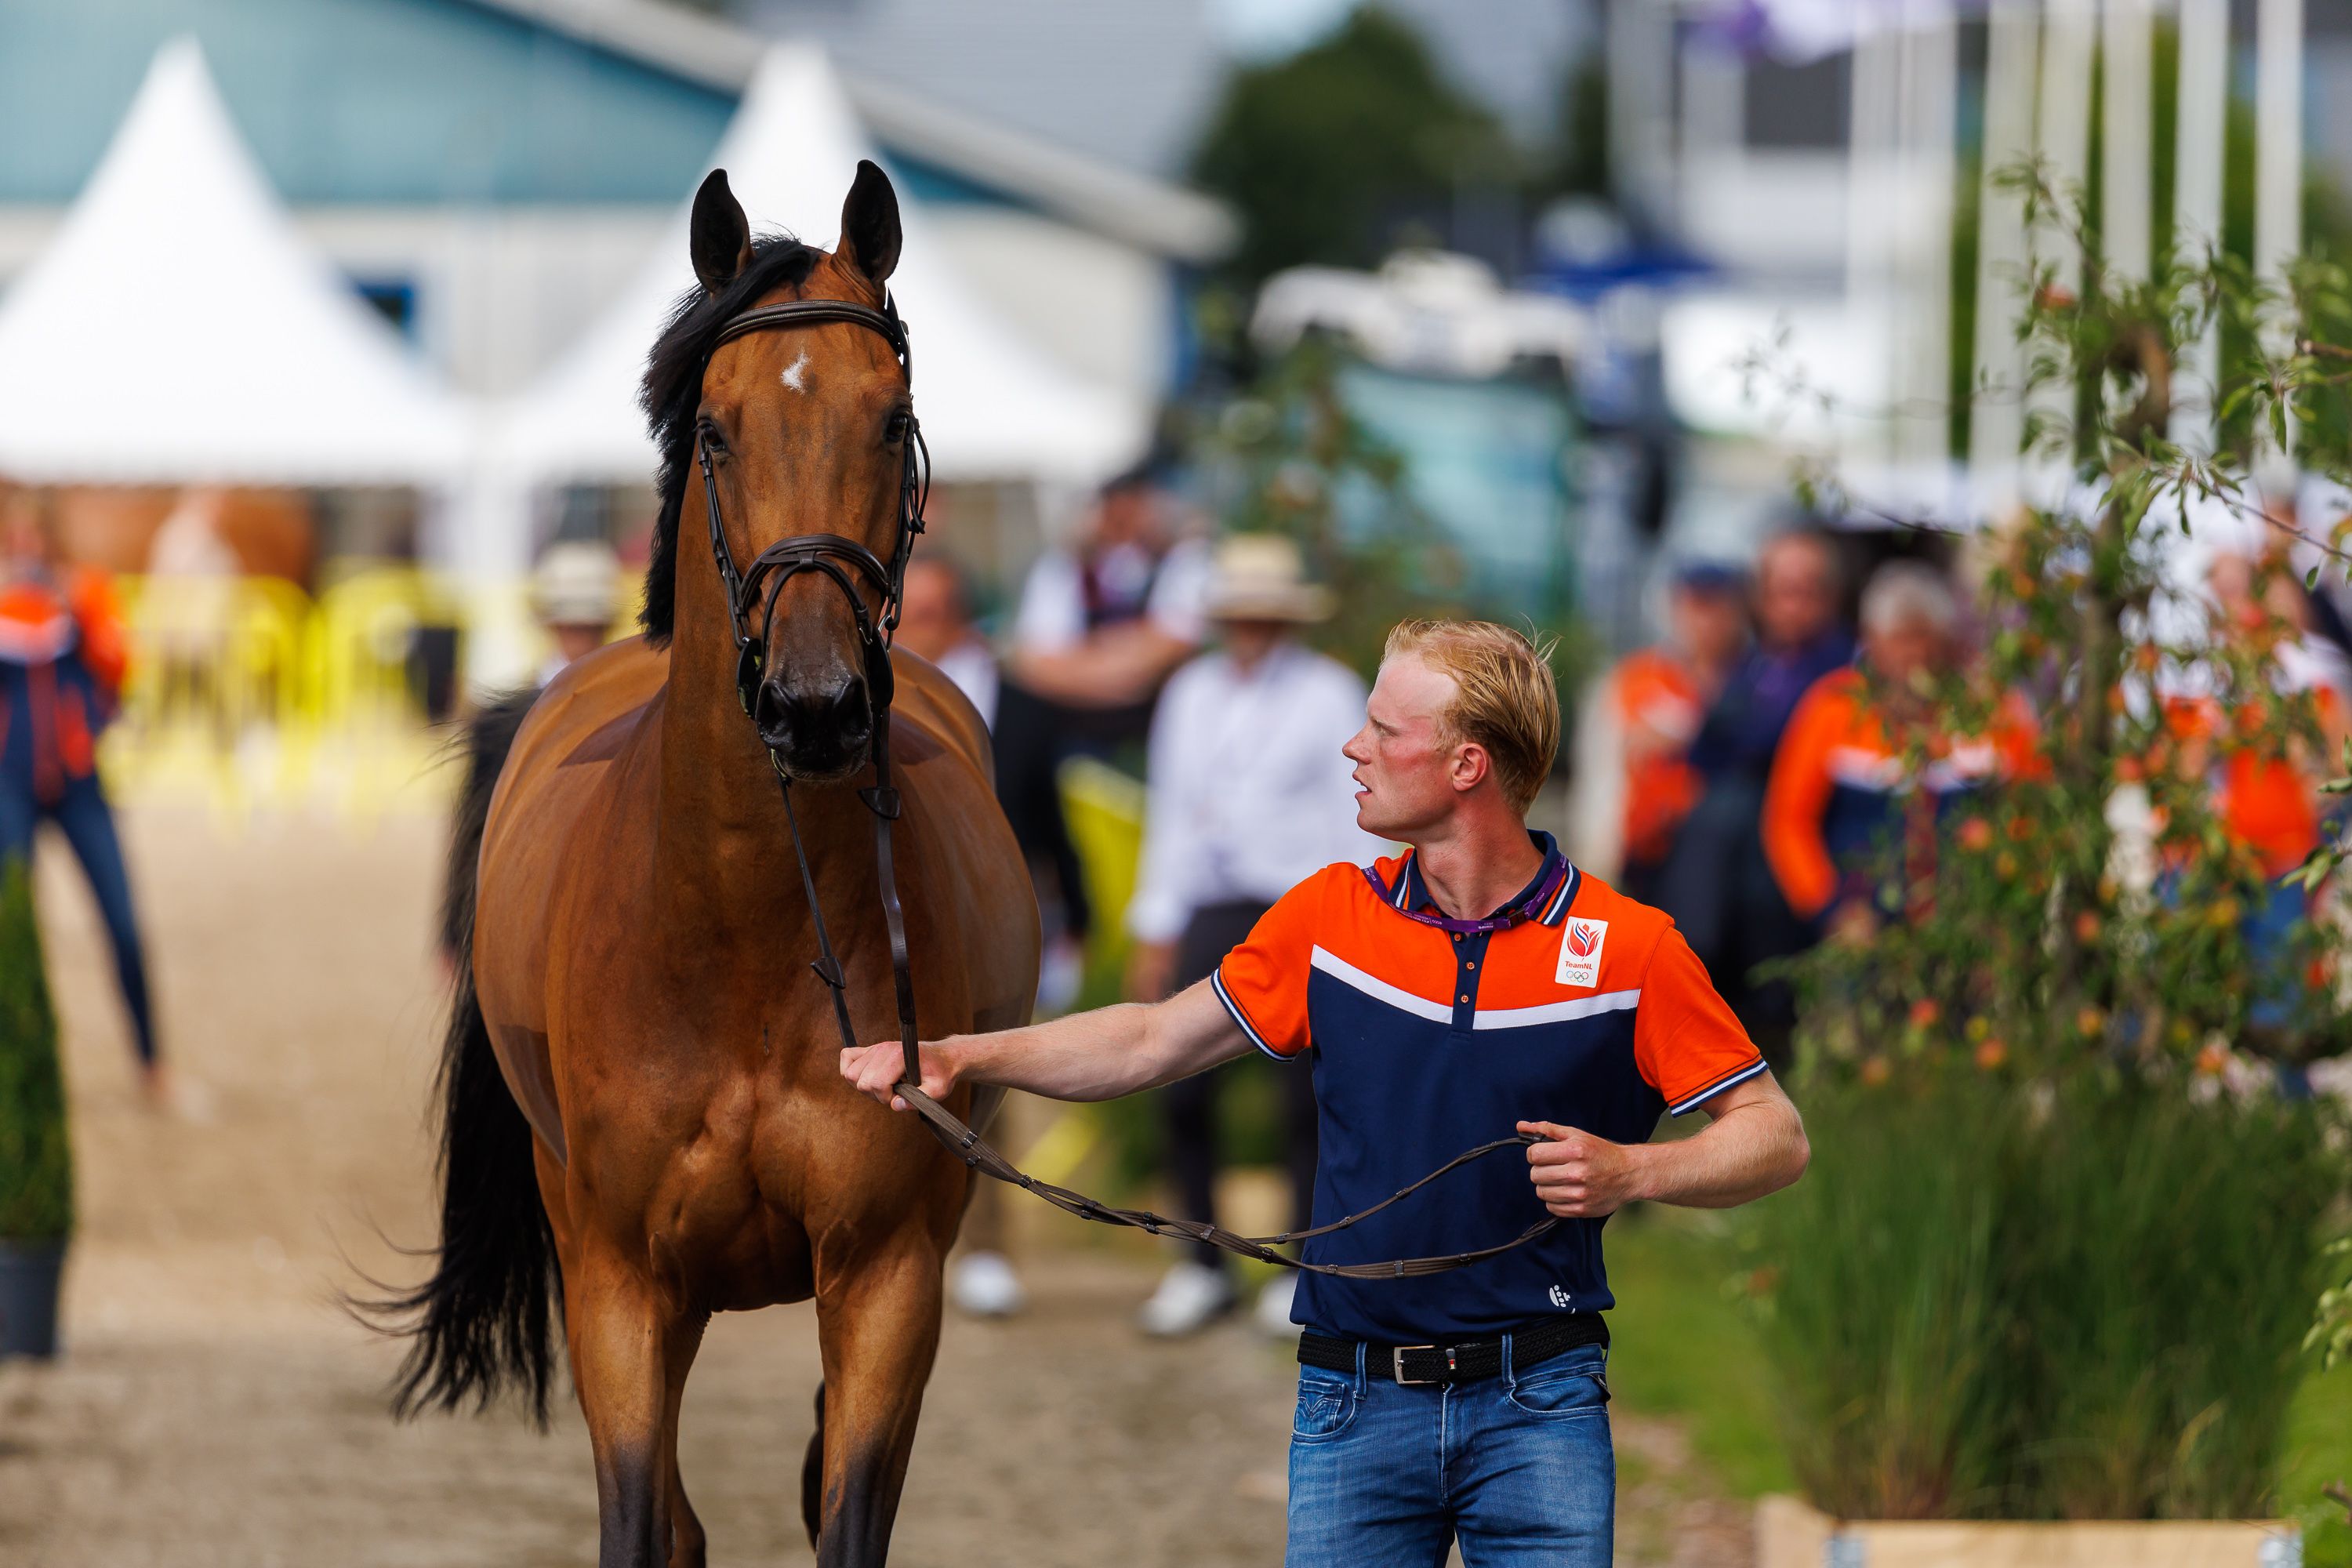 Five horses up for re-examination in Herning